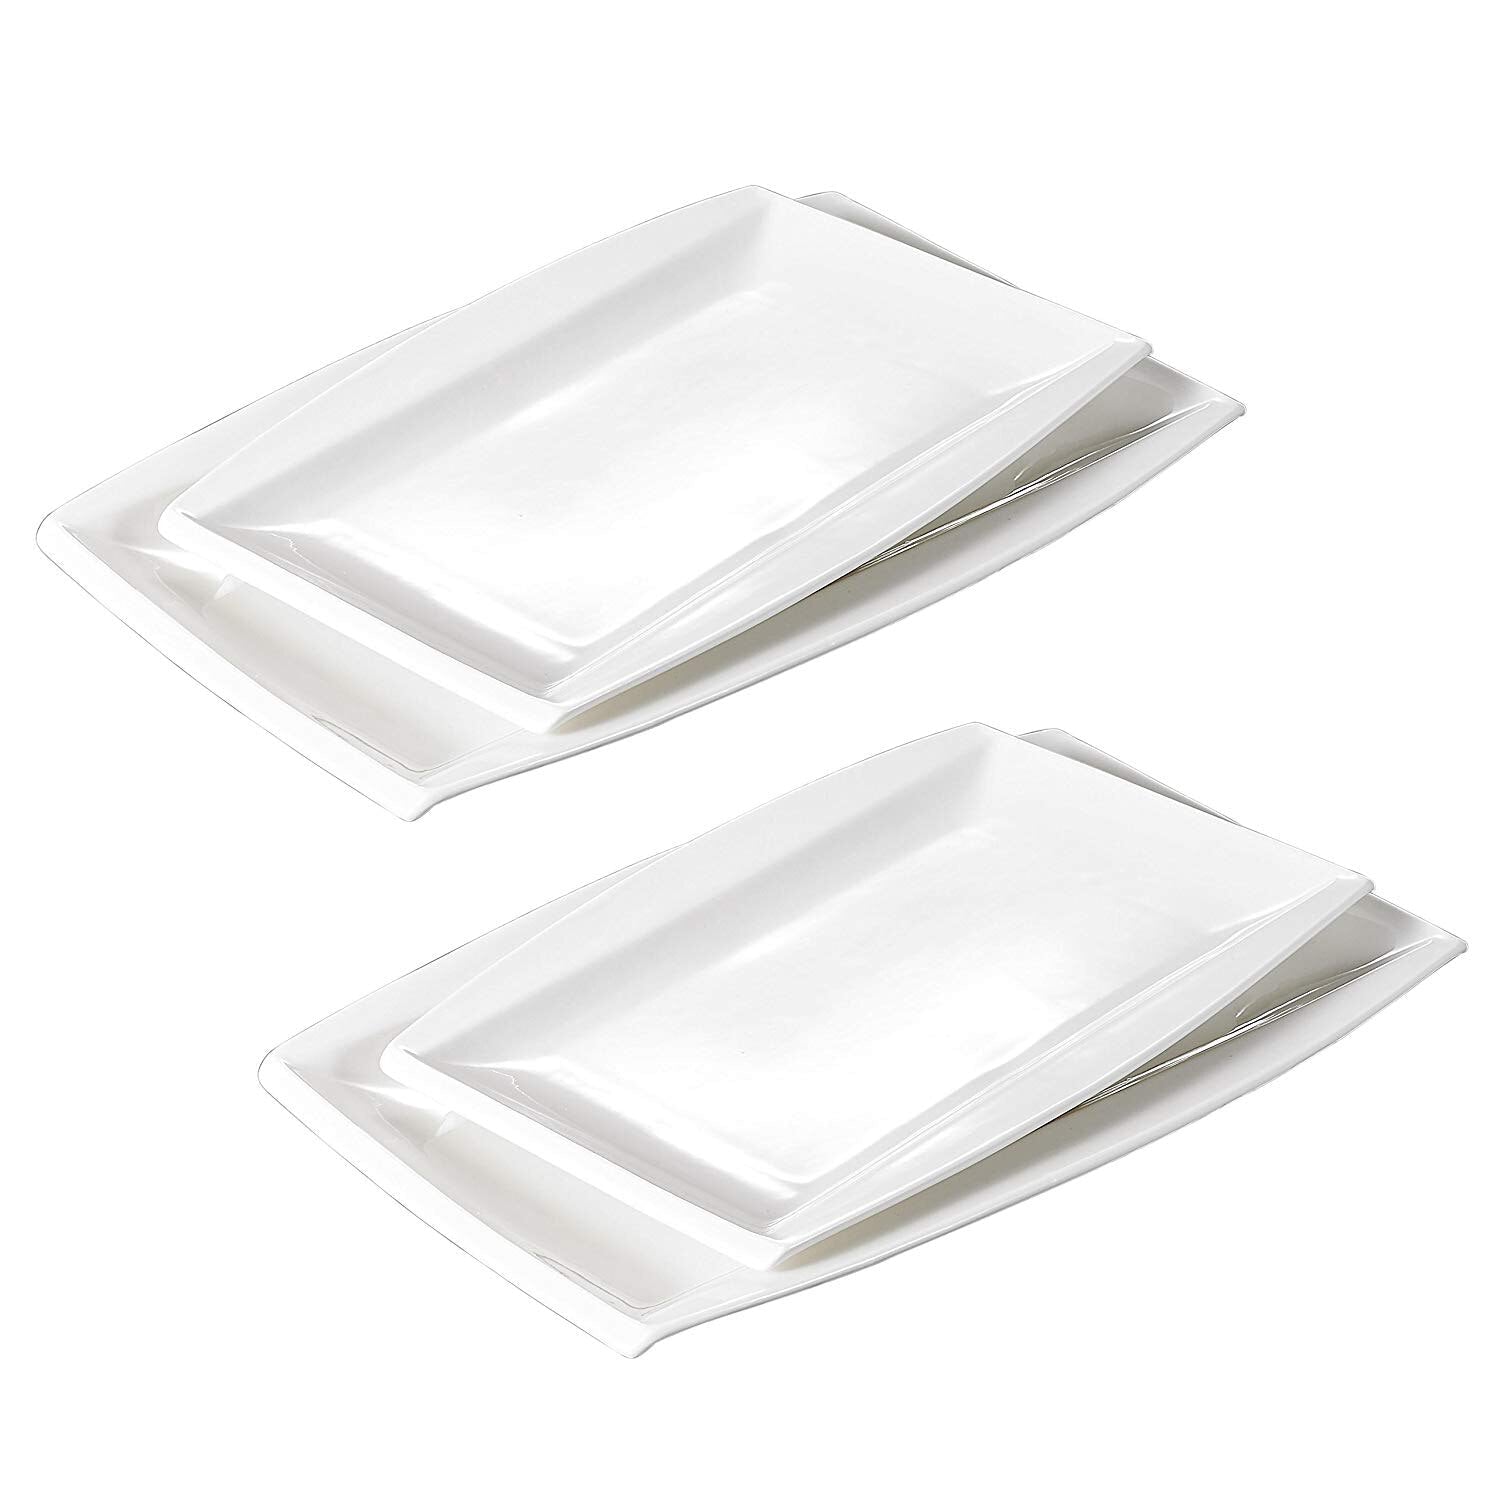 Blance 4-Piece Porcelain Dinner Plate Sets with 11" and 13.25" Rectangular Plate - Nordic Side - 111325, Blance, Dessert, Dinner, MALACASA, Piece, Plate, Platter, Porcelain, Rectangular, Serv